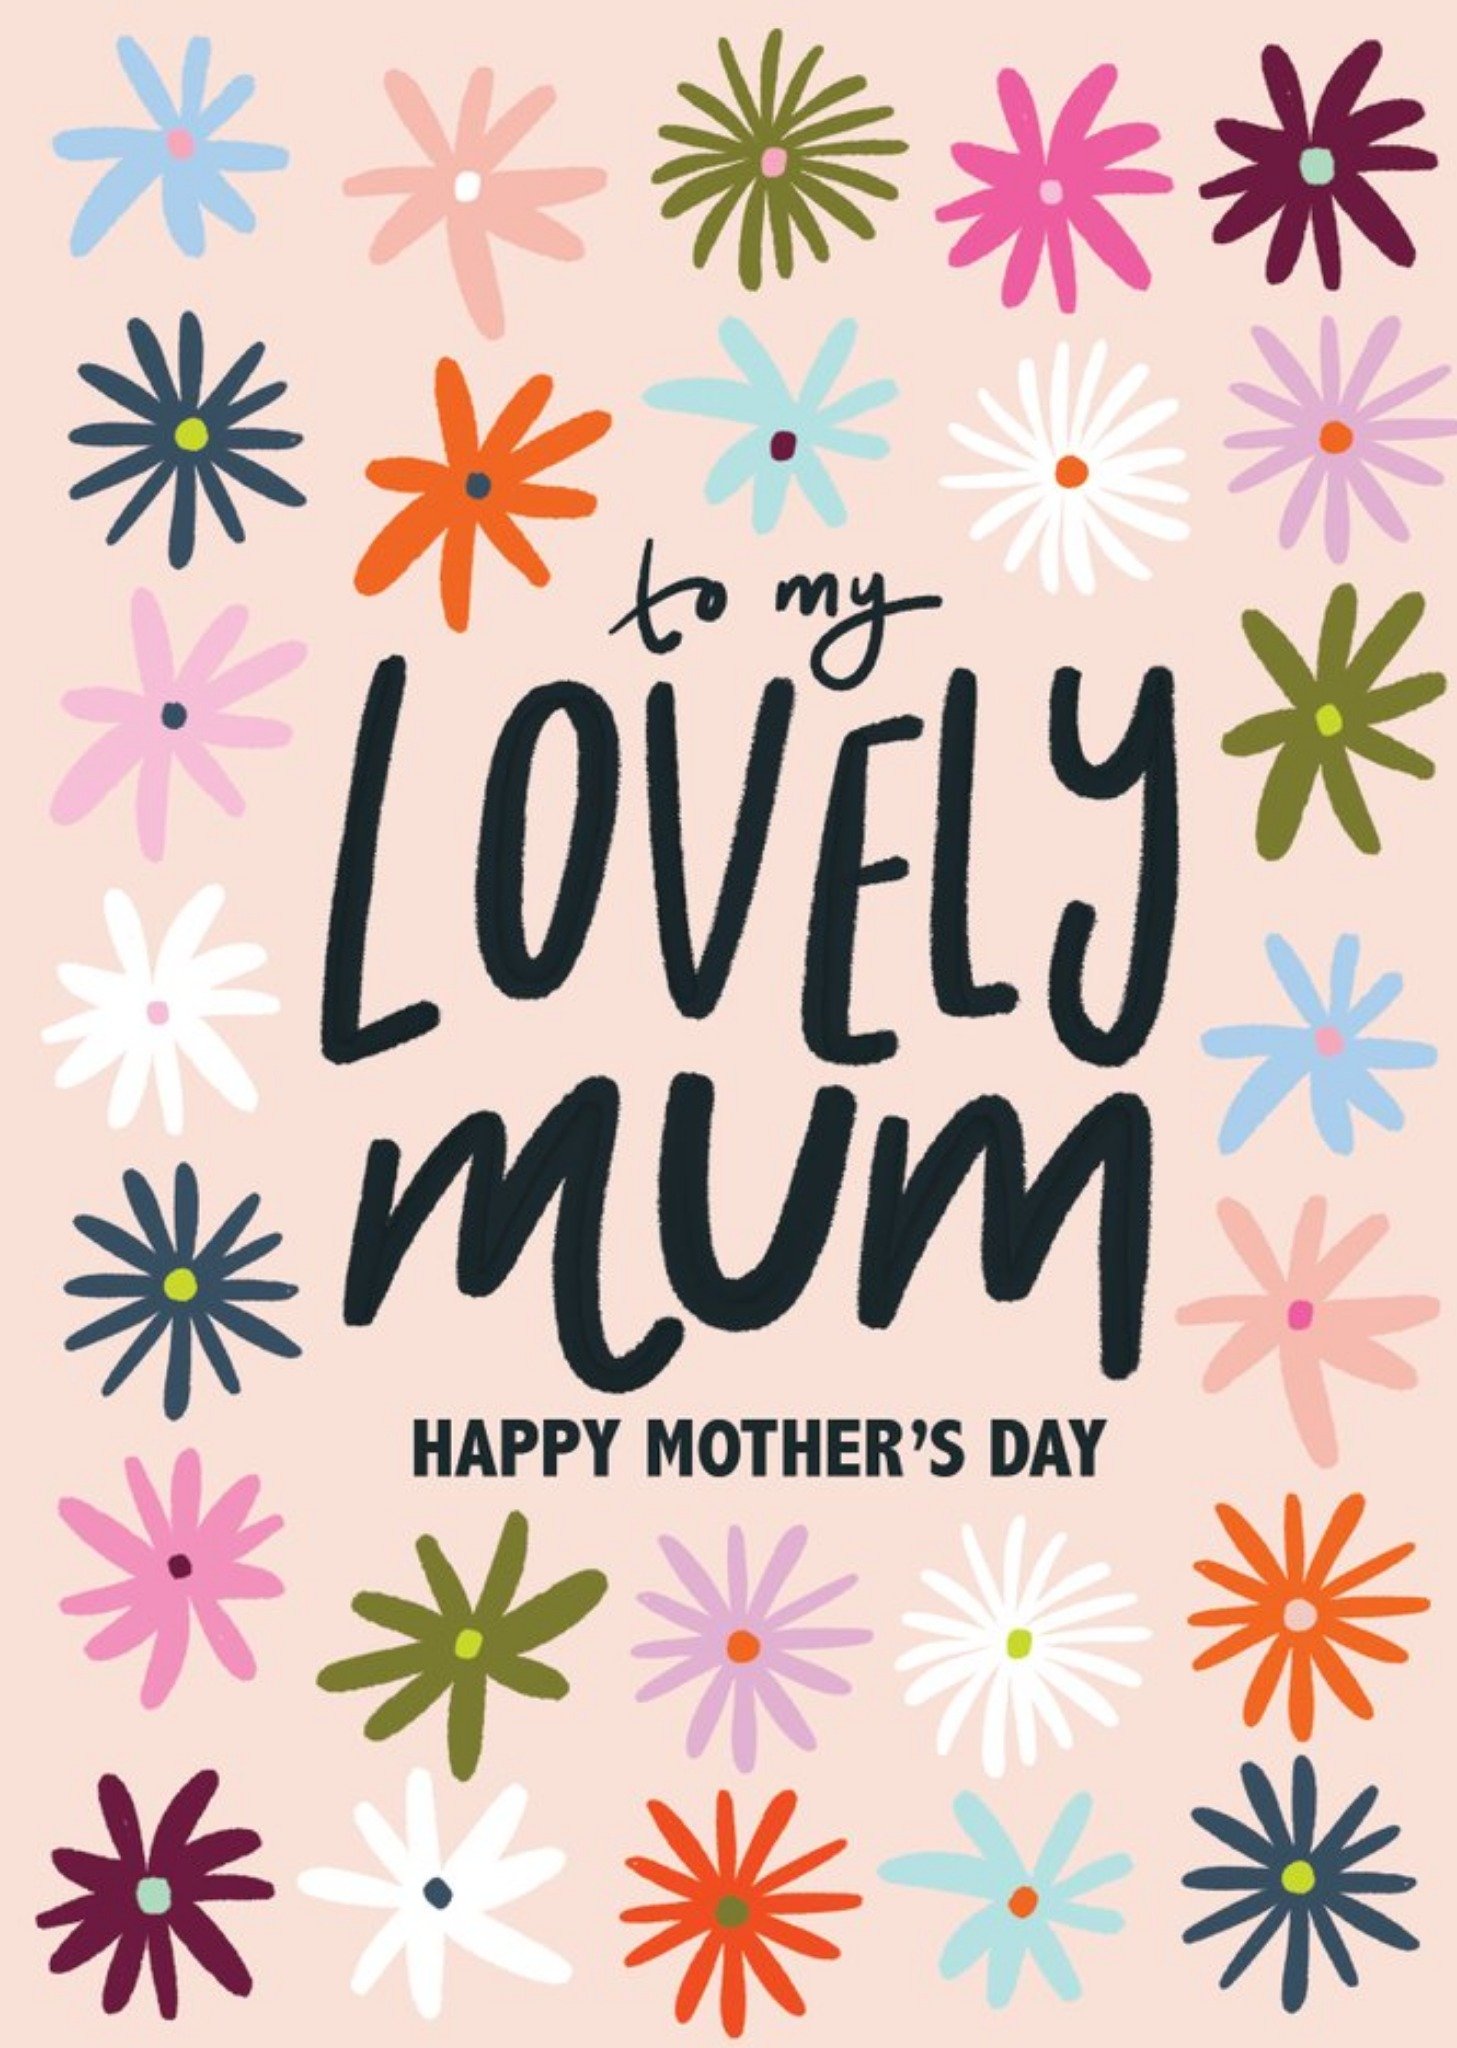 Moonpig Featuring Handwritten Typography Surrounded By Colourful Flowers Mother's Day Card Ecard